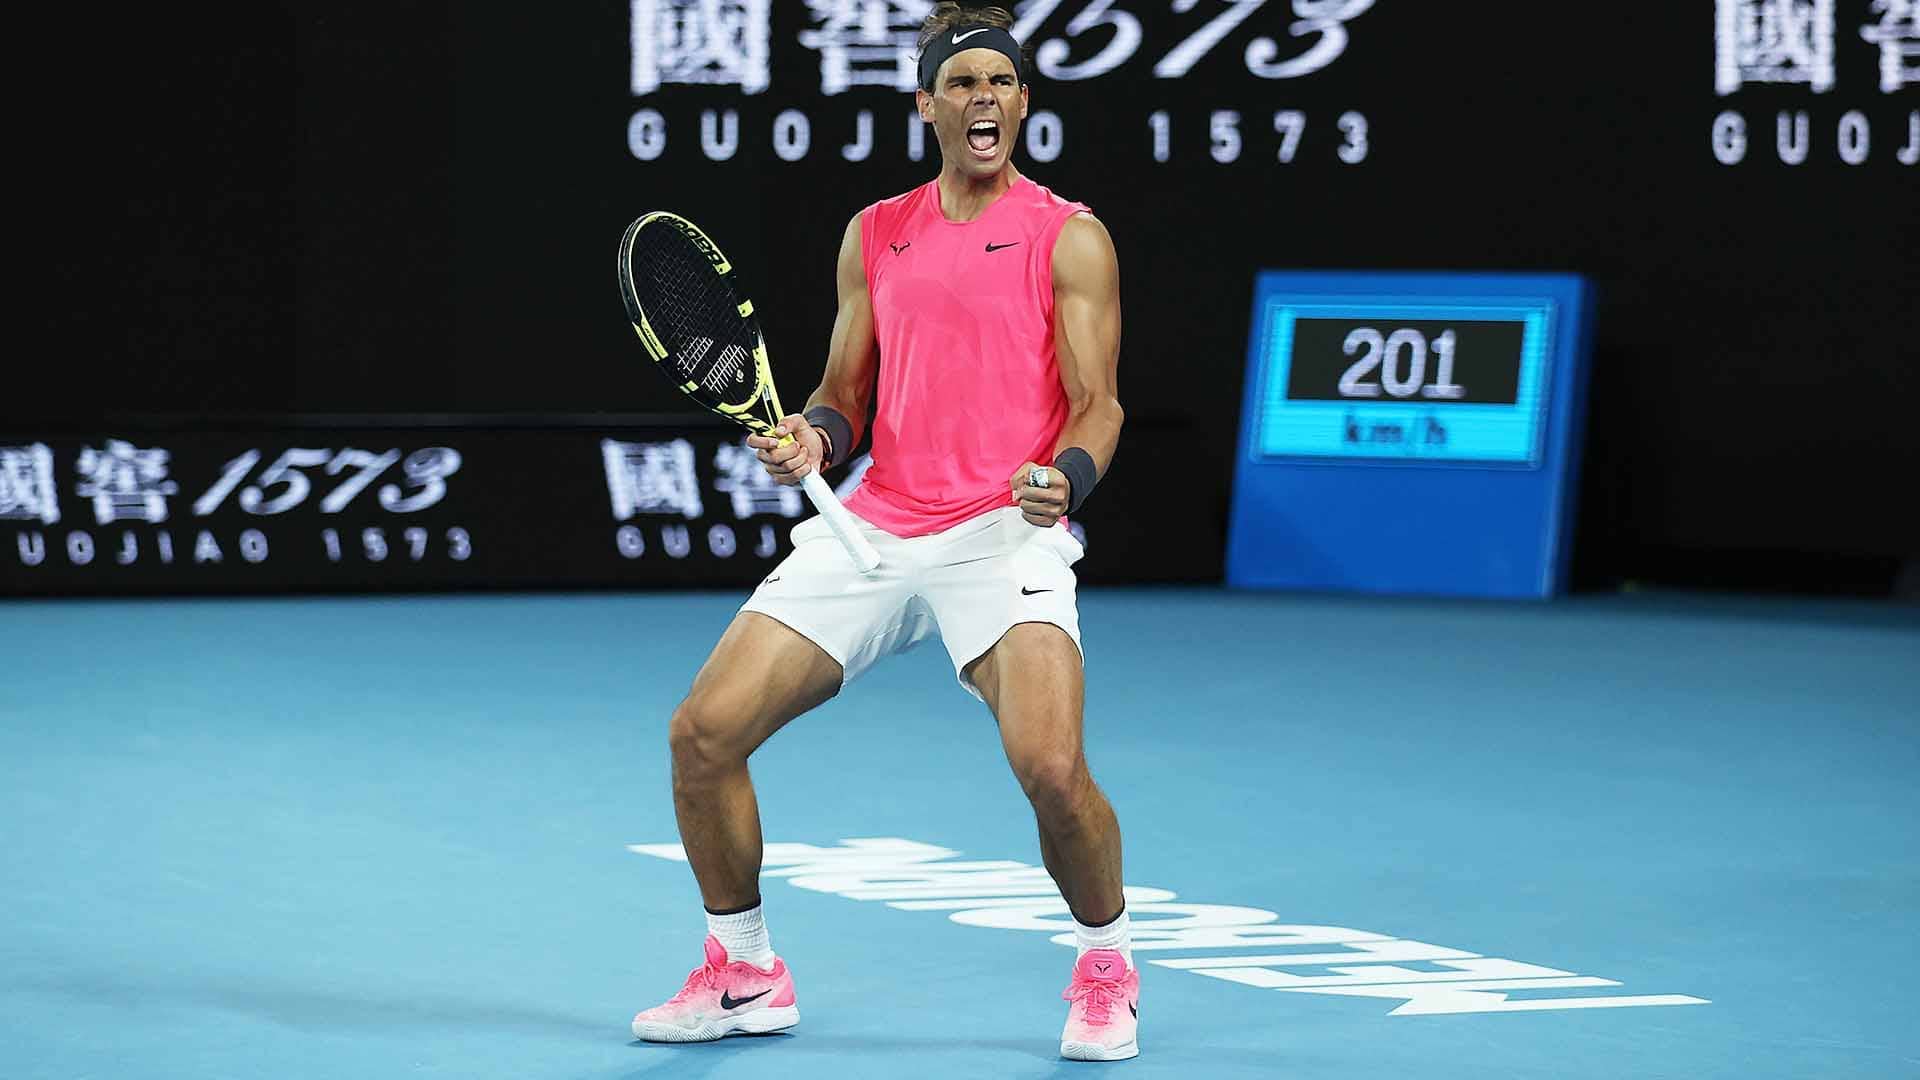 Rafael Nadal is the top seed at the Australian Open.